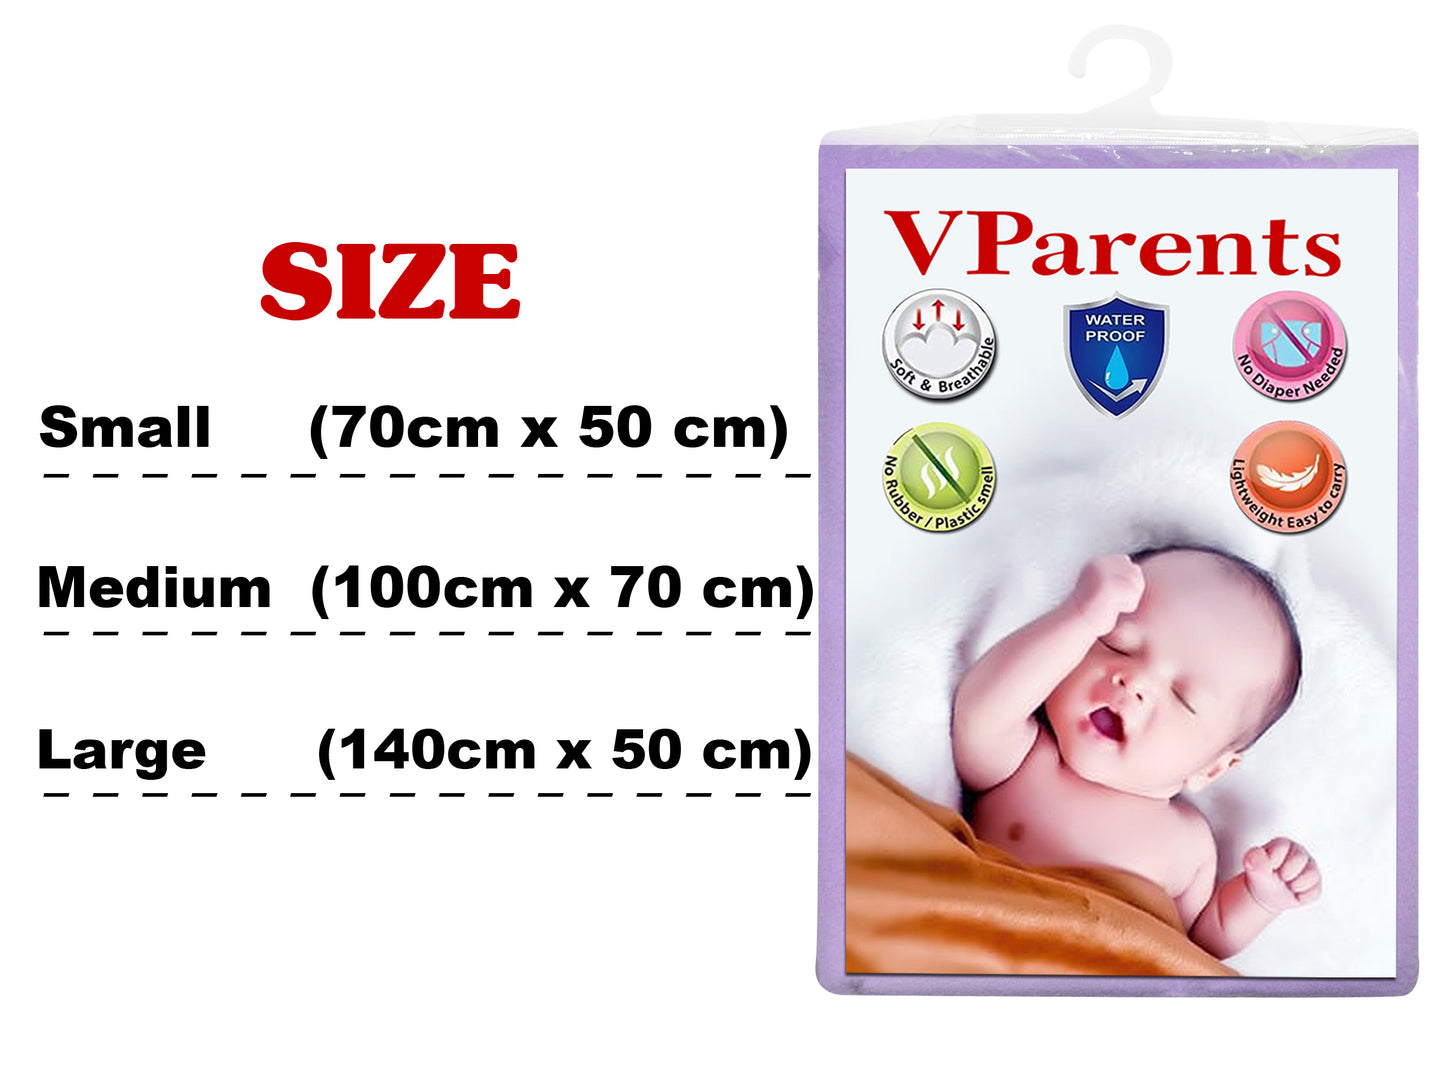 VParents Chubby Cheeks Water Proof Baby Bed Protector Reusable Dry Sheet